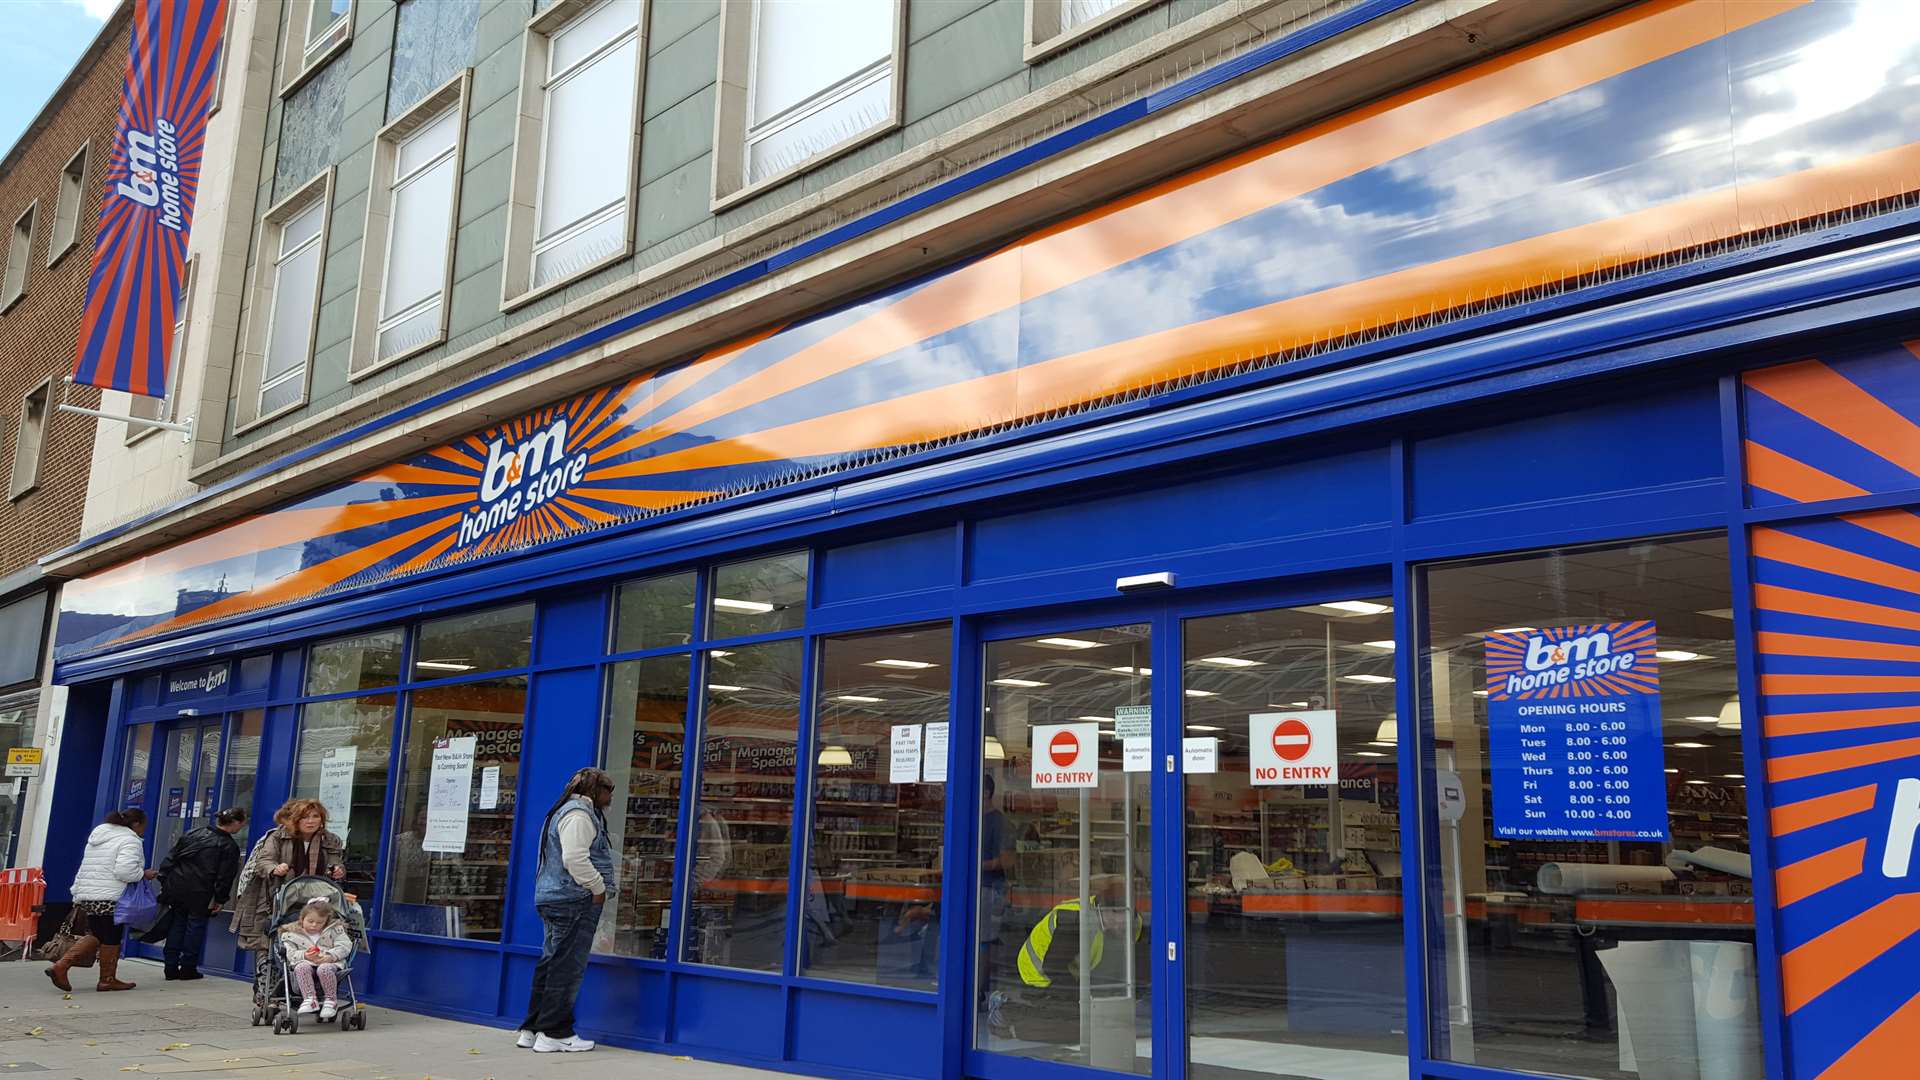 B&M in New Road, Gravesend, is opening this week